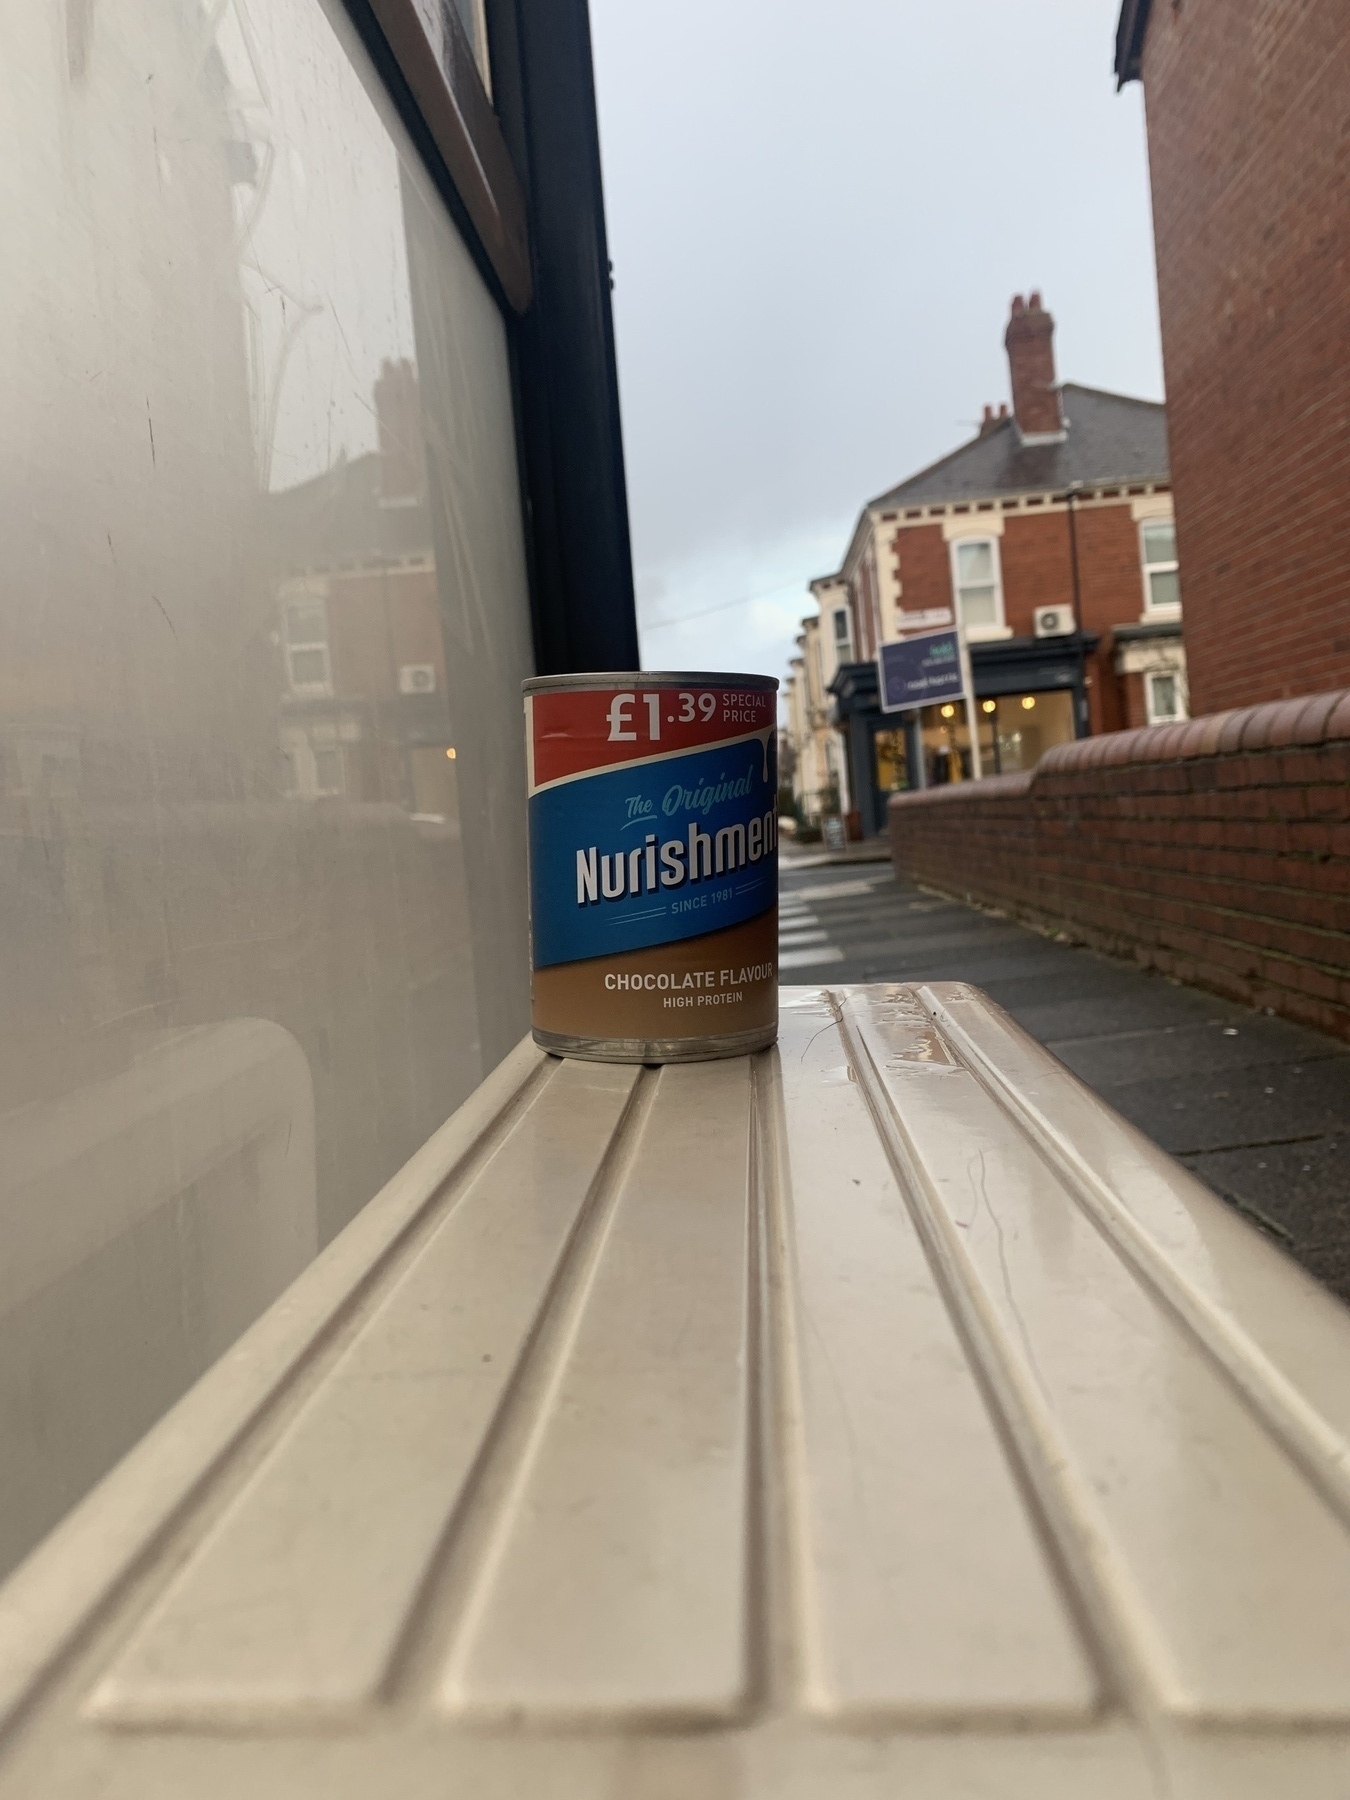 An open can of The Original Nurishment sitting on the bus stop bench.